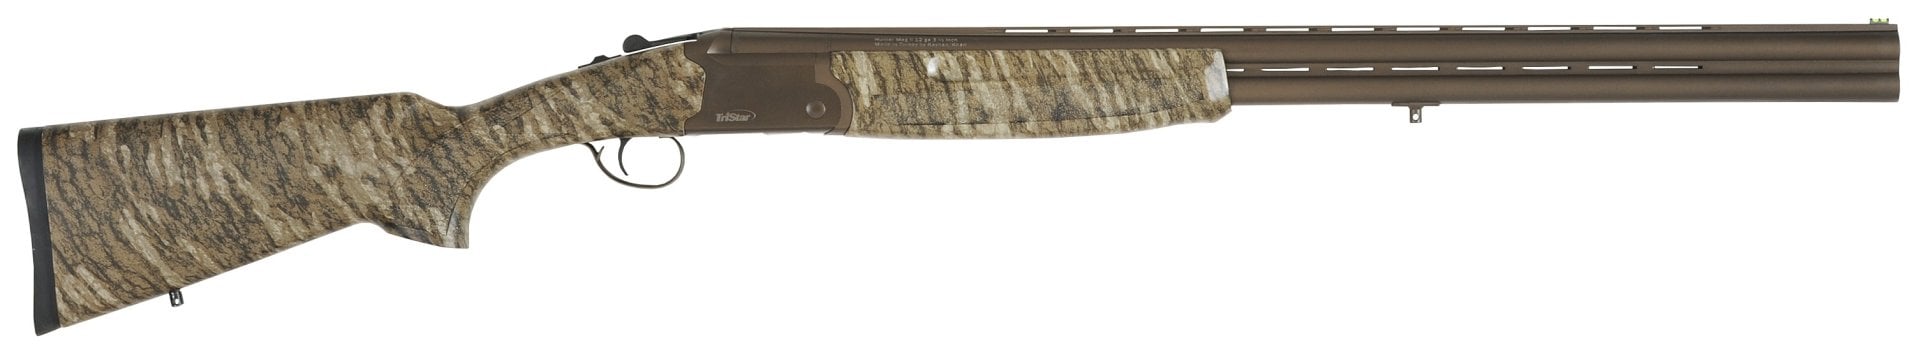 This over/under will serve you well in any field or clays pursuit.